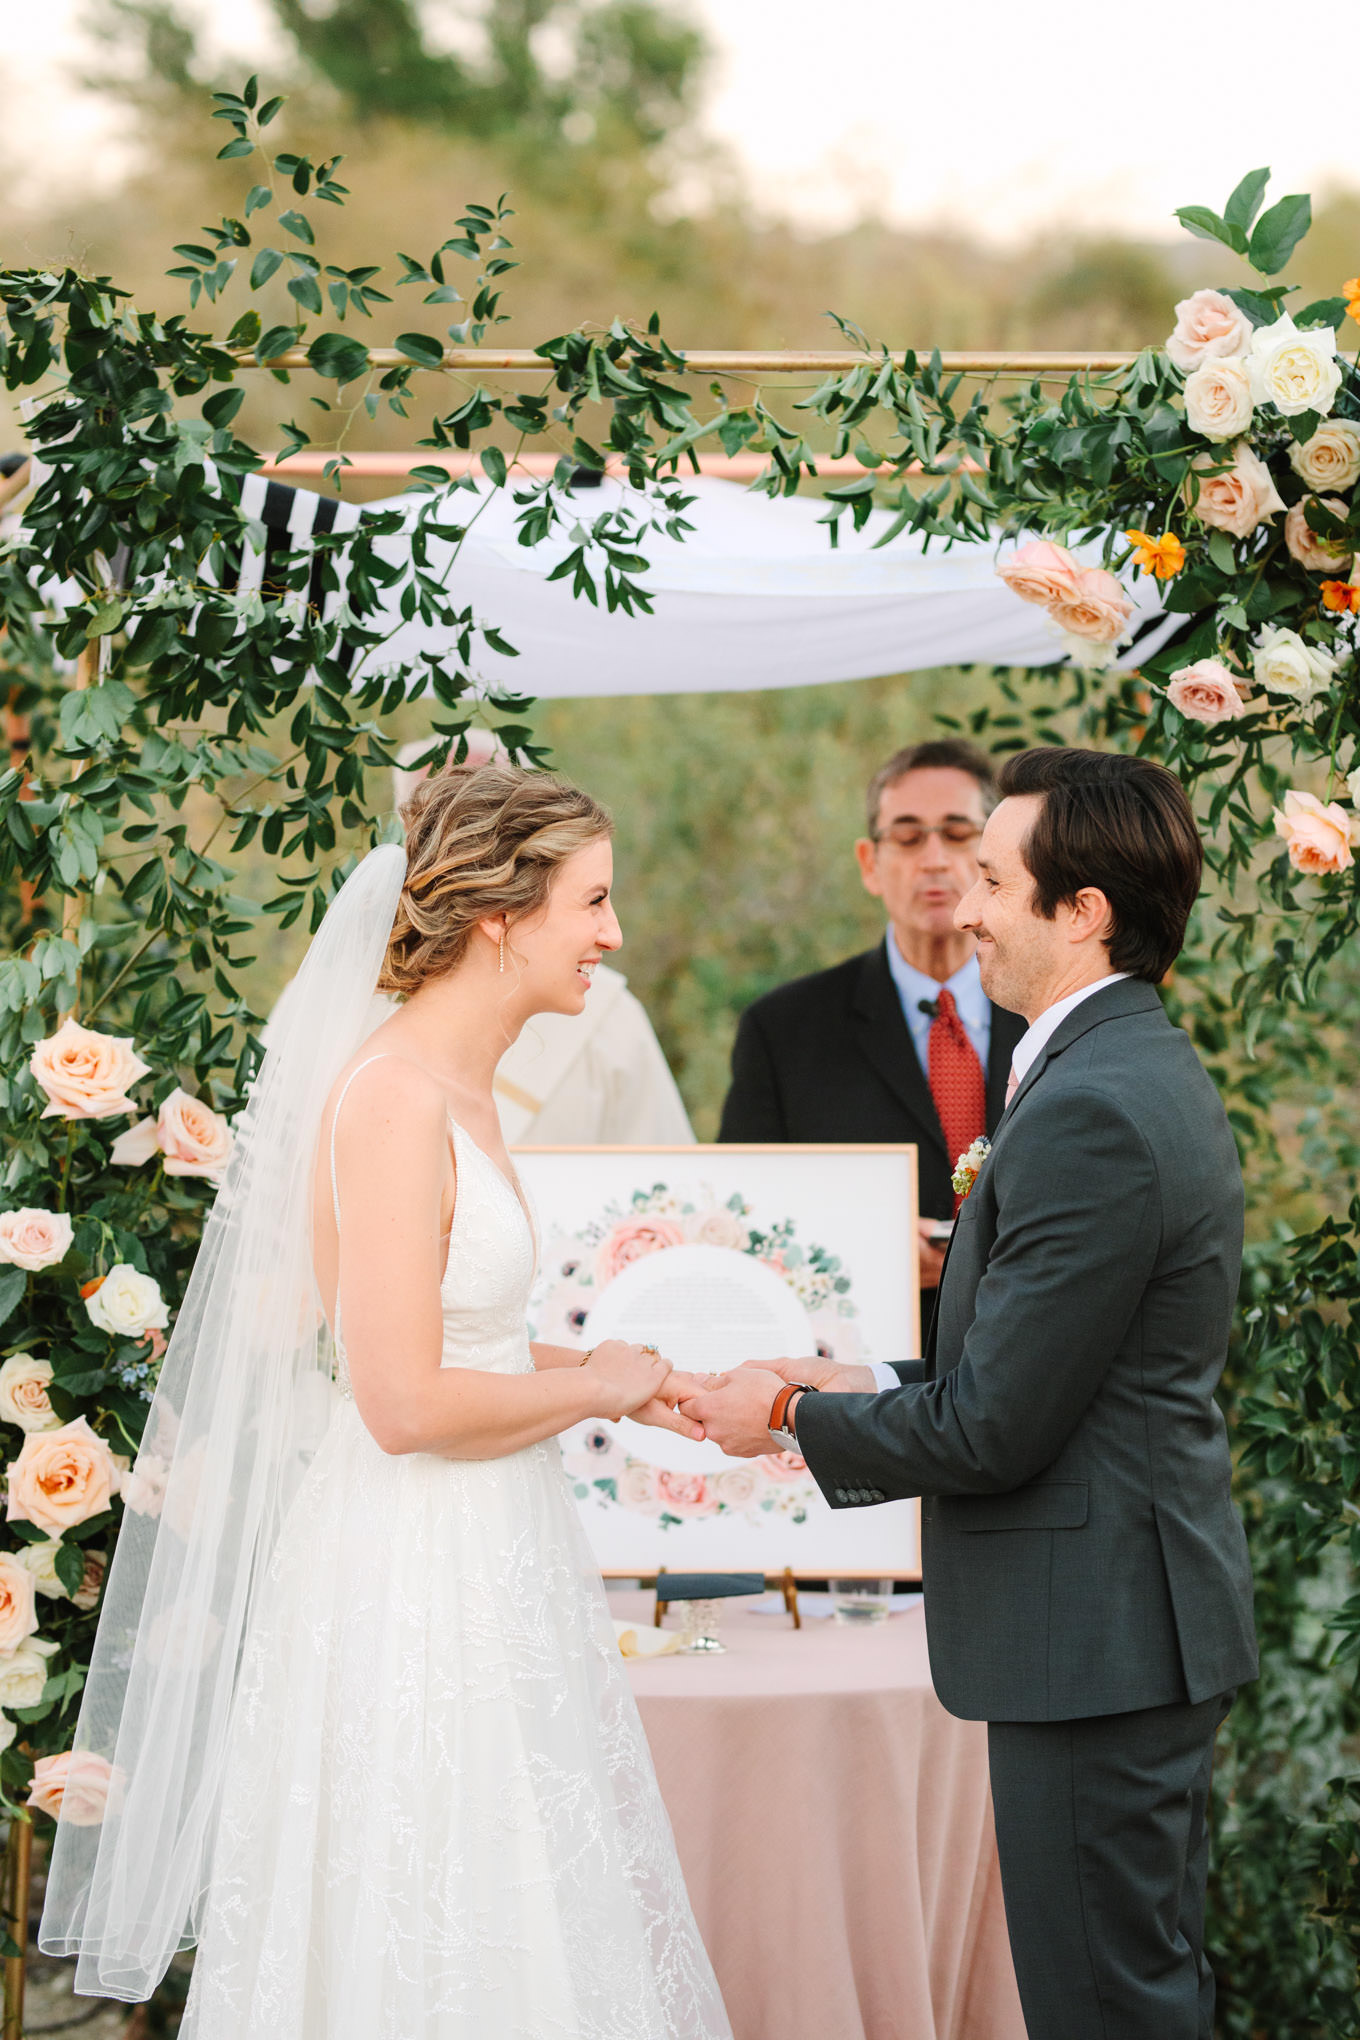 Bride and groom exchanging rings | Living Desert Zoo & Gardens wedding with unique details | Elevated and colorful wedding photography for fun-loving couples in Southern California |  #PalmSprings #palmspringsphotographer #gardenwedding #palmspringswedding  Source: Mary Costa Photography | Los Angeles wedding photographer 